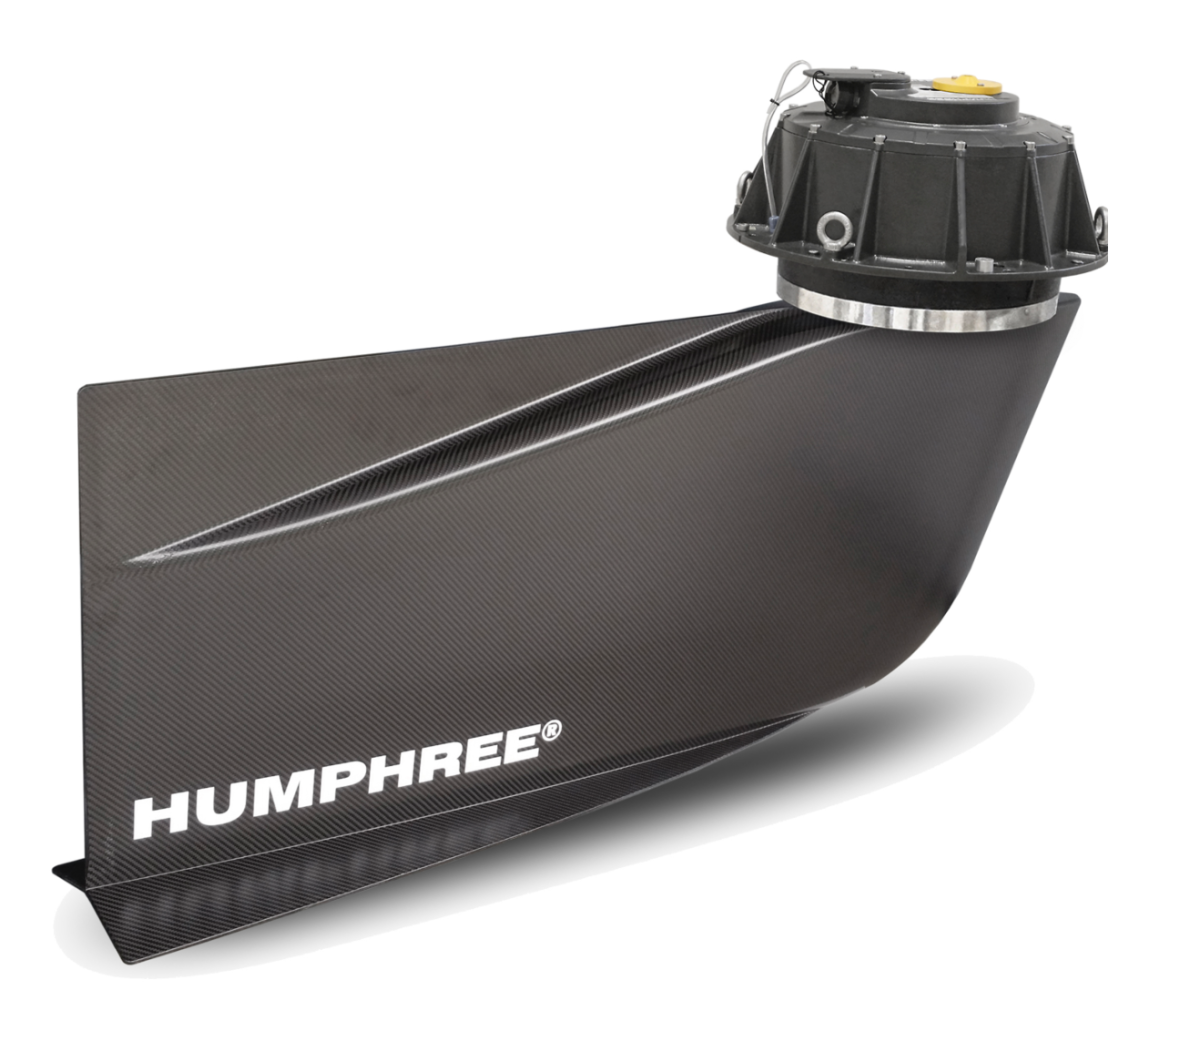 Humphree's new electronically controlled stabilizer fin.